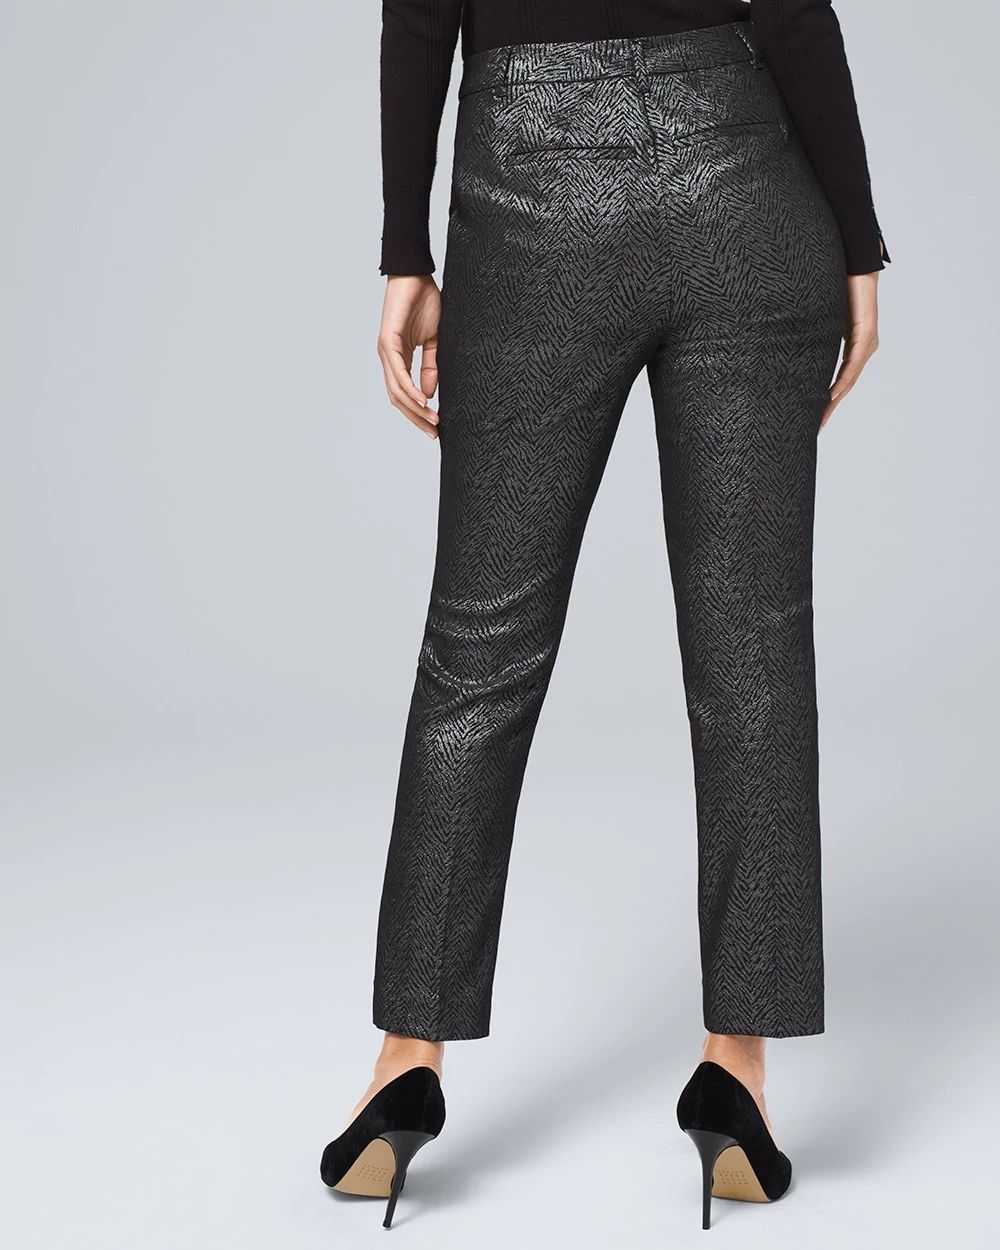 Comfort Stretch Jacquard Slim Ankle Pants click to view larger image.